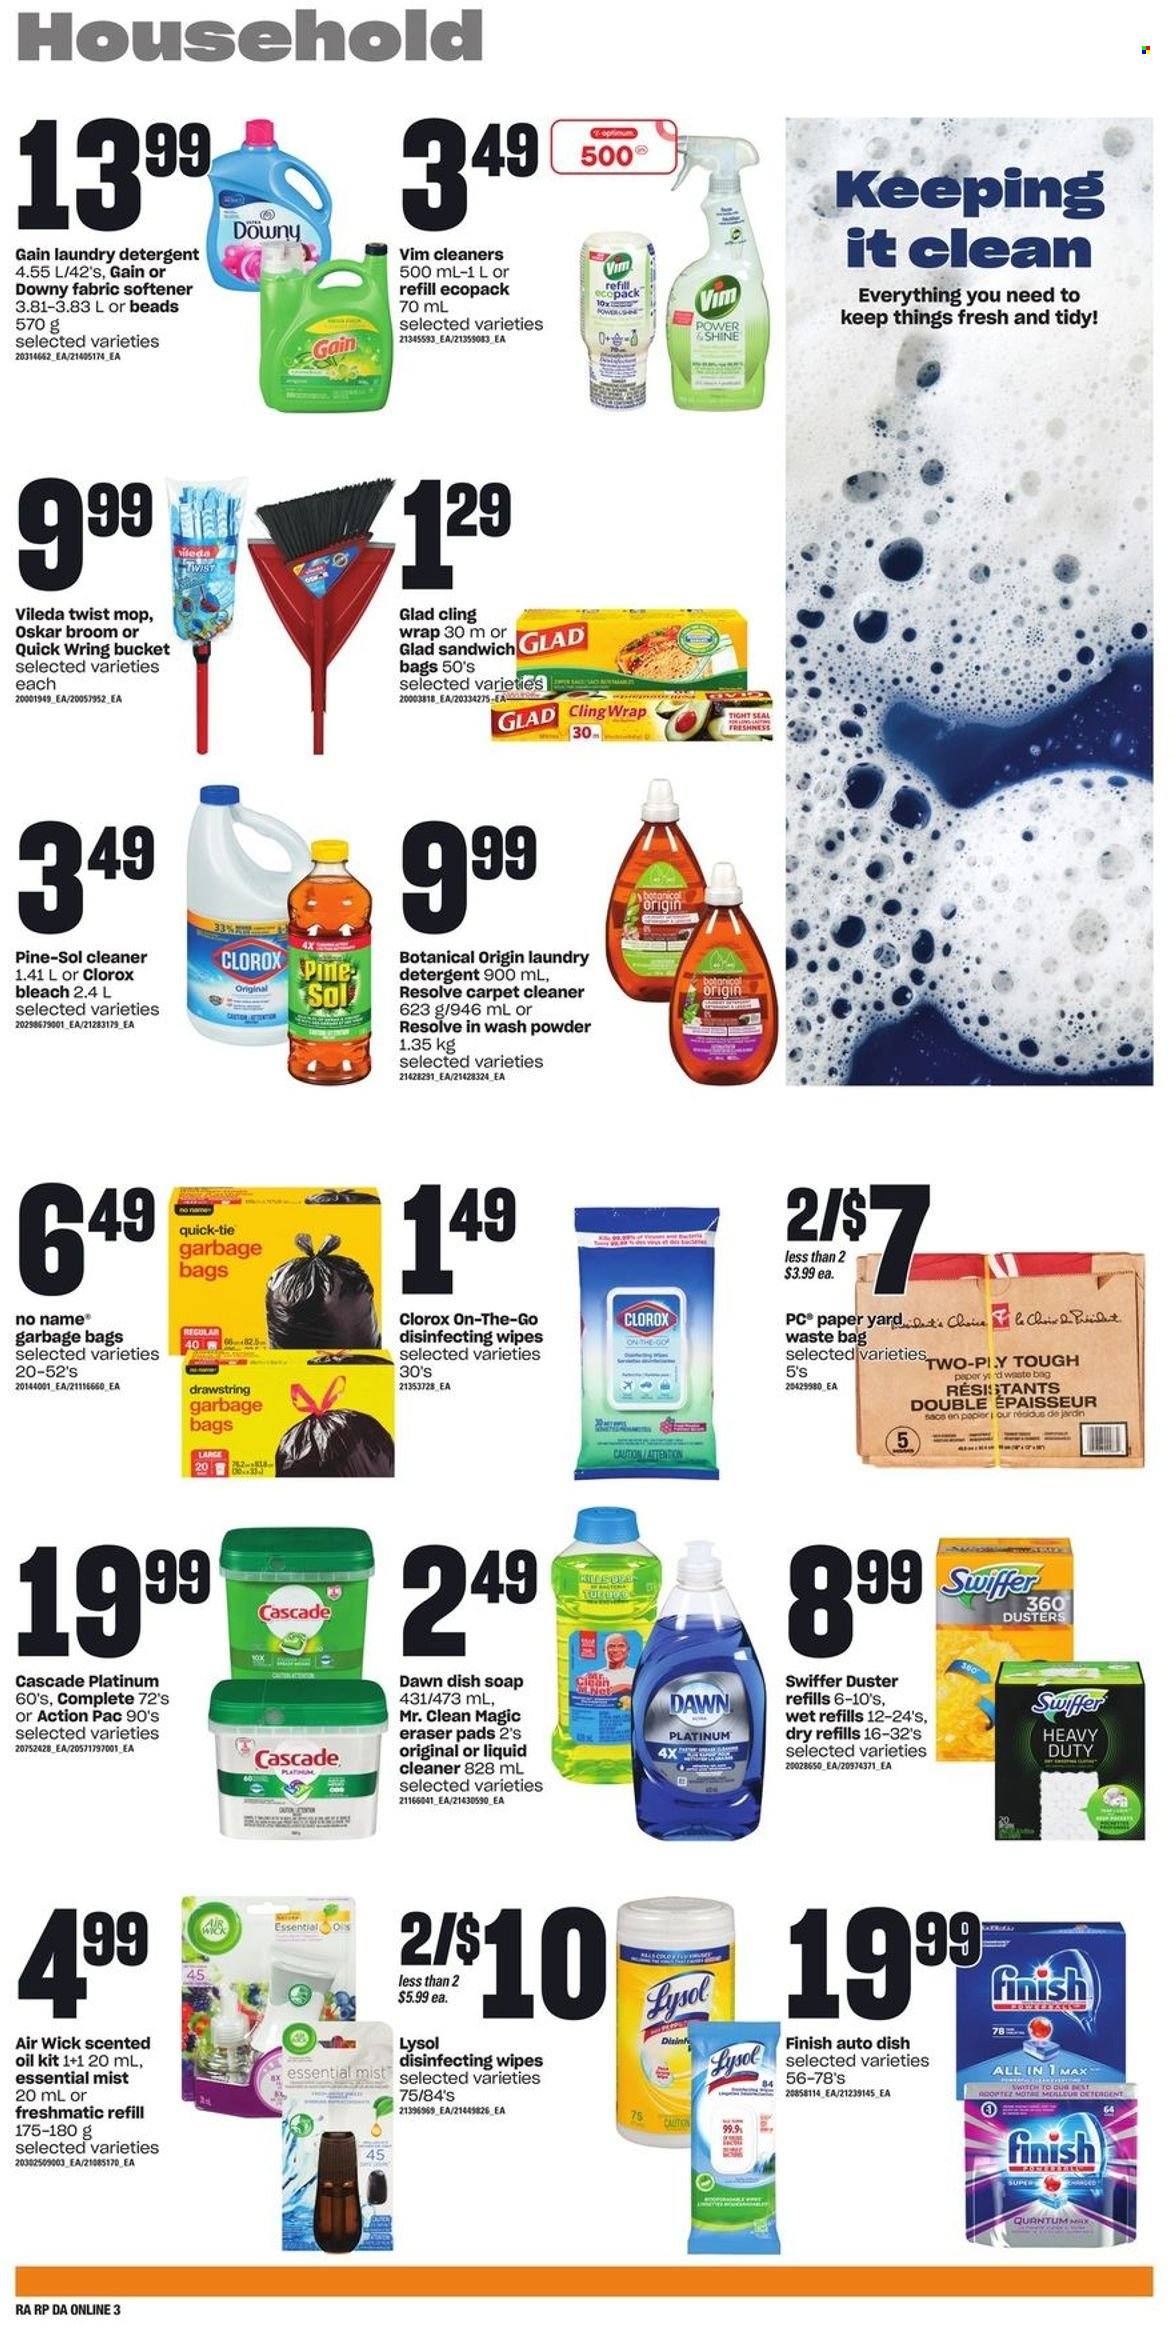 thumbnail - Atlantic Superstore Flyer - June 30, 2022 - July 06, 2022 - Sales products - No Name, sandwich, Président, oil, wipes, Gain, cleaner, bleach, liquid cleaner, Lysol, Clorox, Pine-Sol, Swiffer, fabric softener, laundry detergent, Cascade, Downy Laundry, soap, Yard, bag, waste bag, detergent. Page 7.